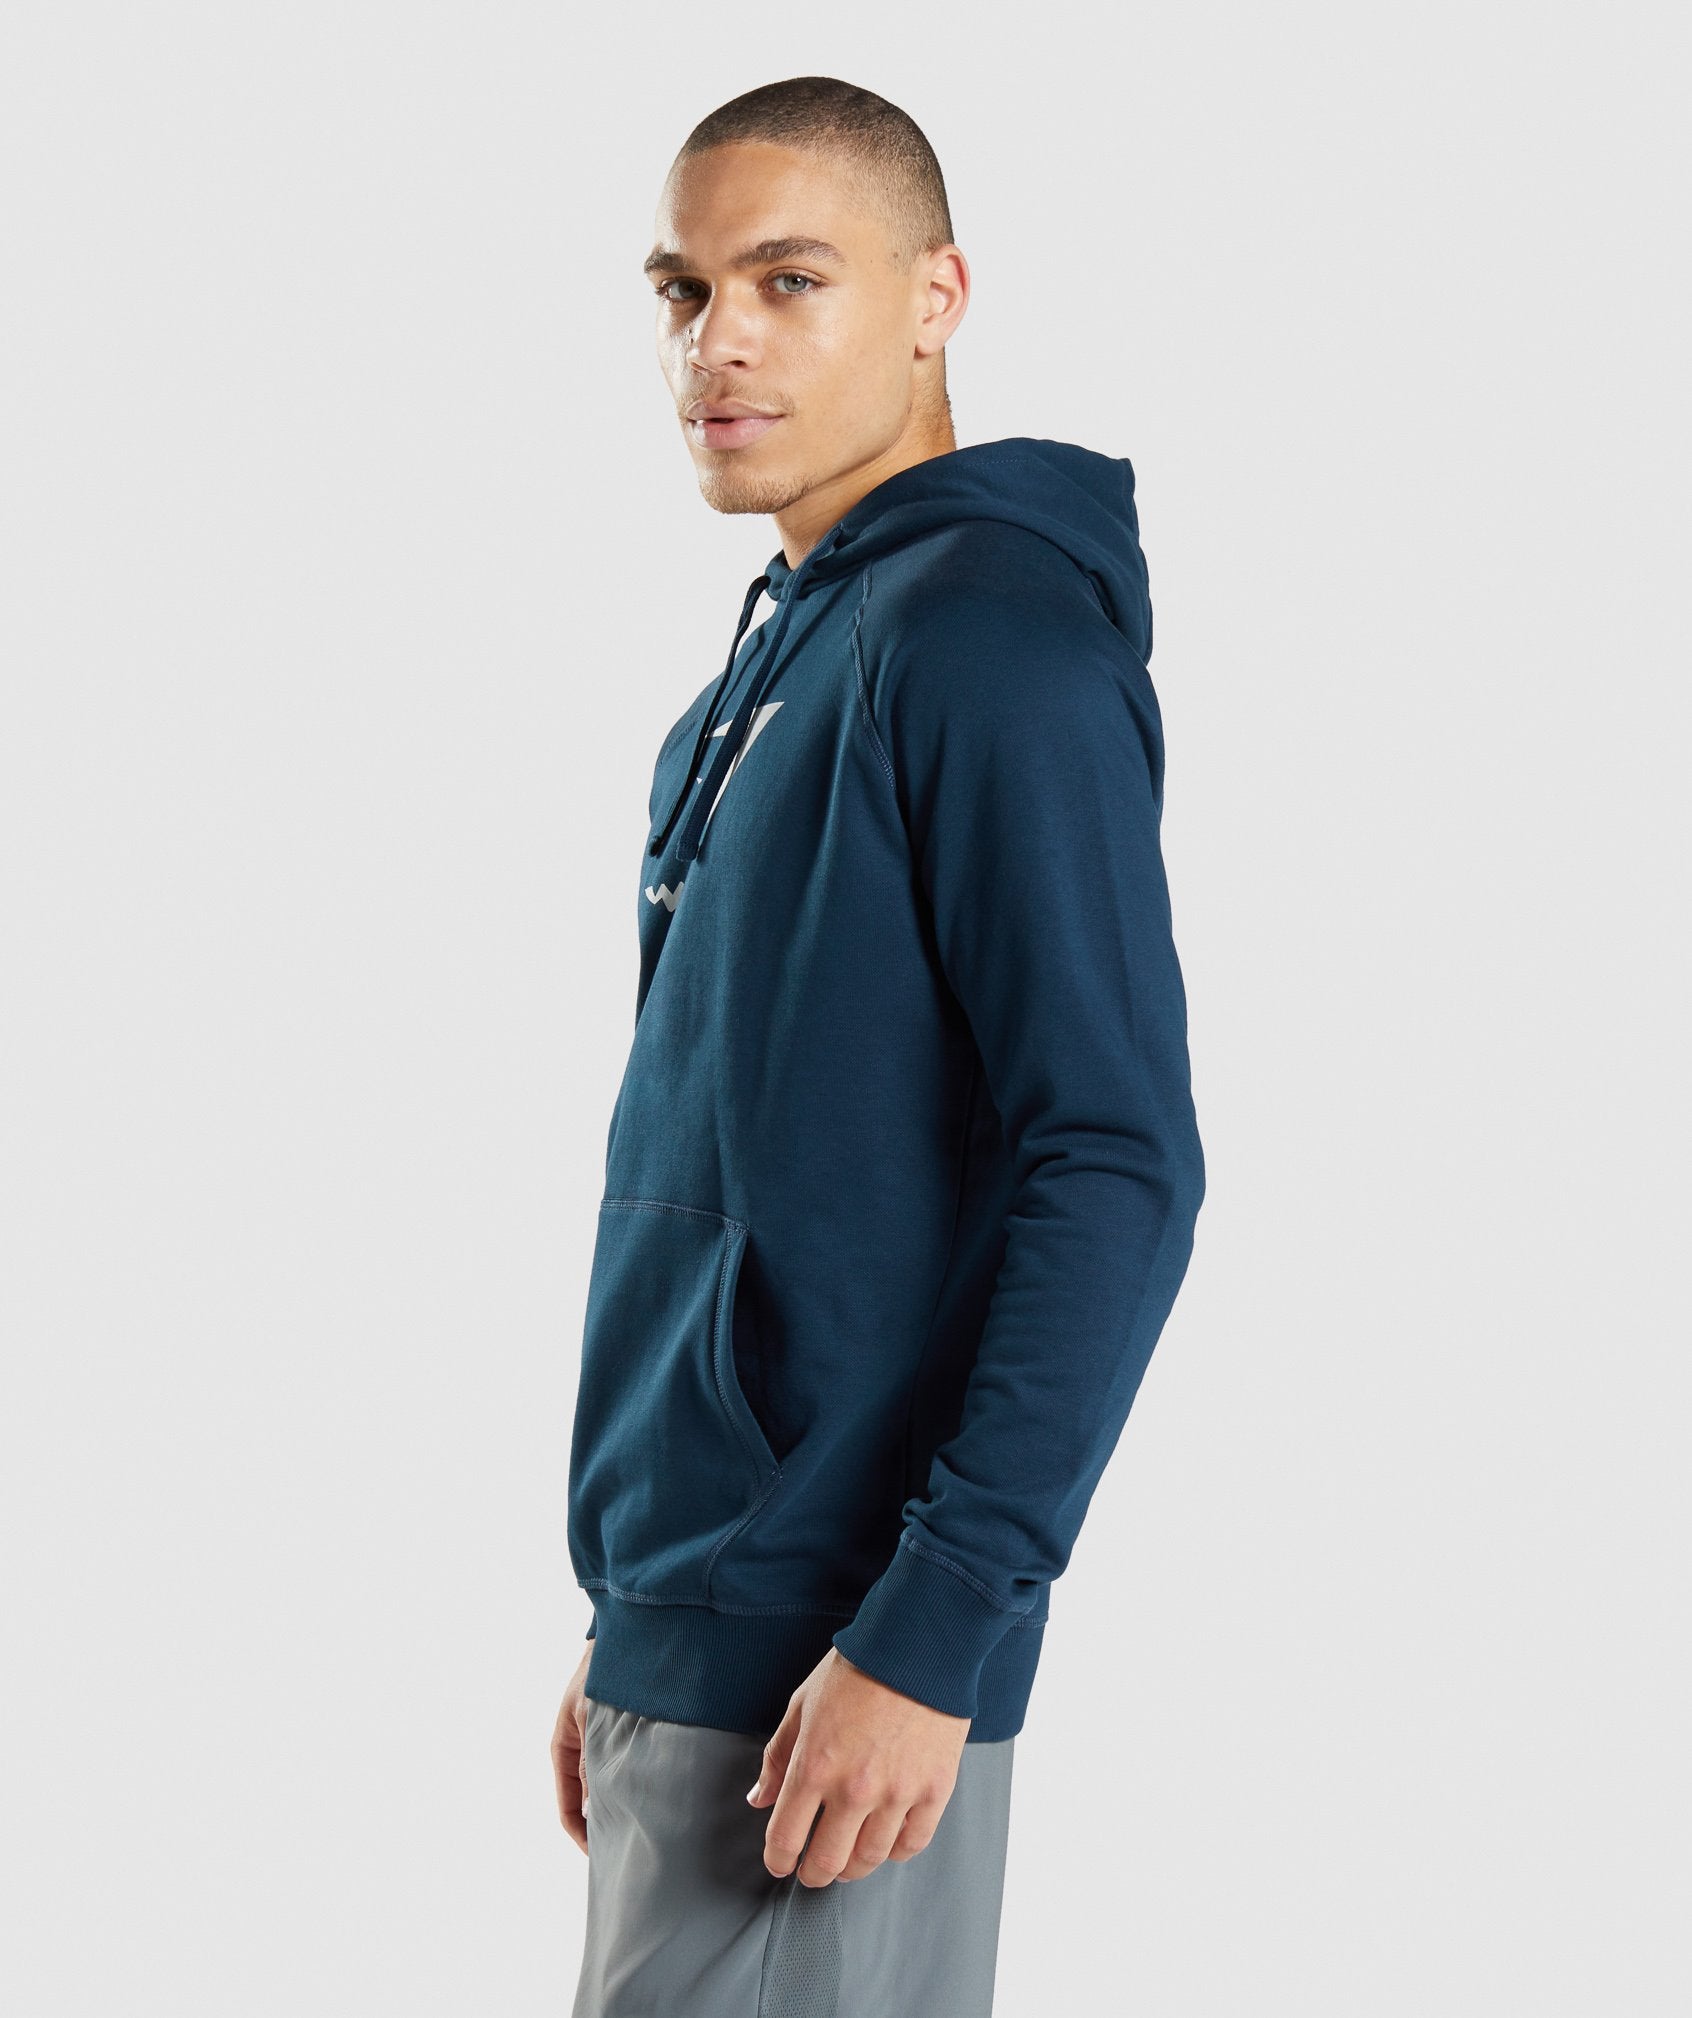 Sharkhead Infill Hoodie in Navy - view 3